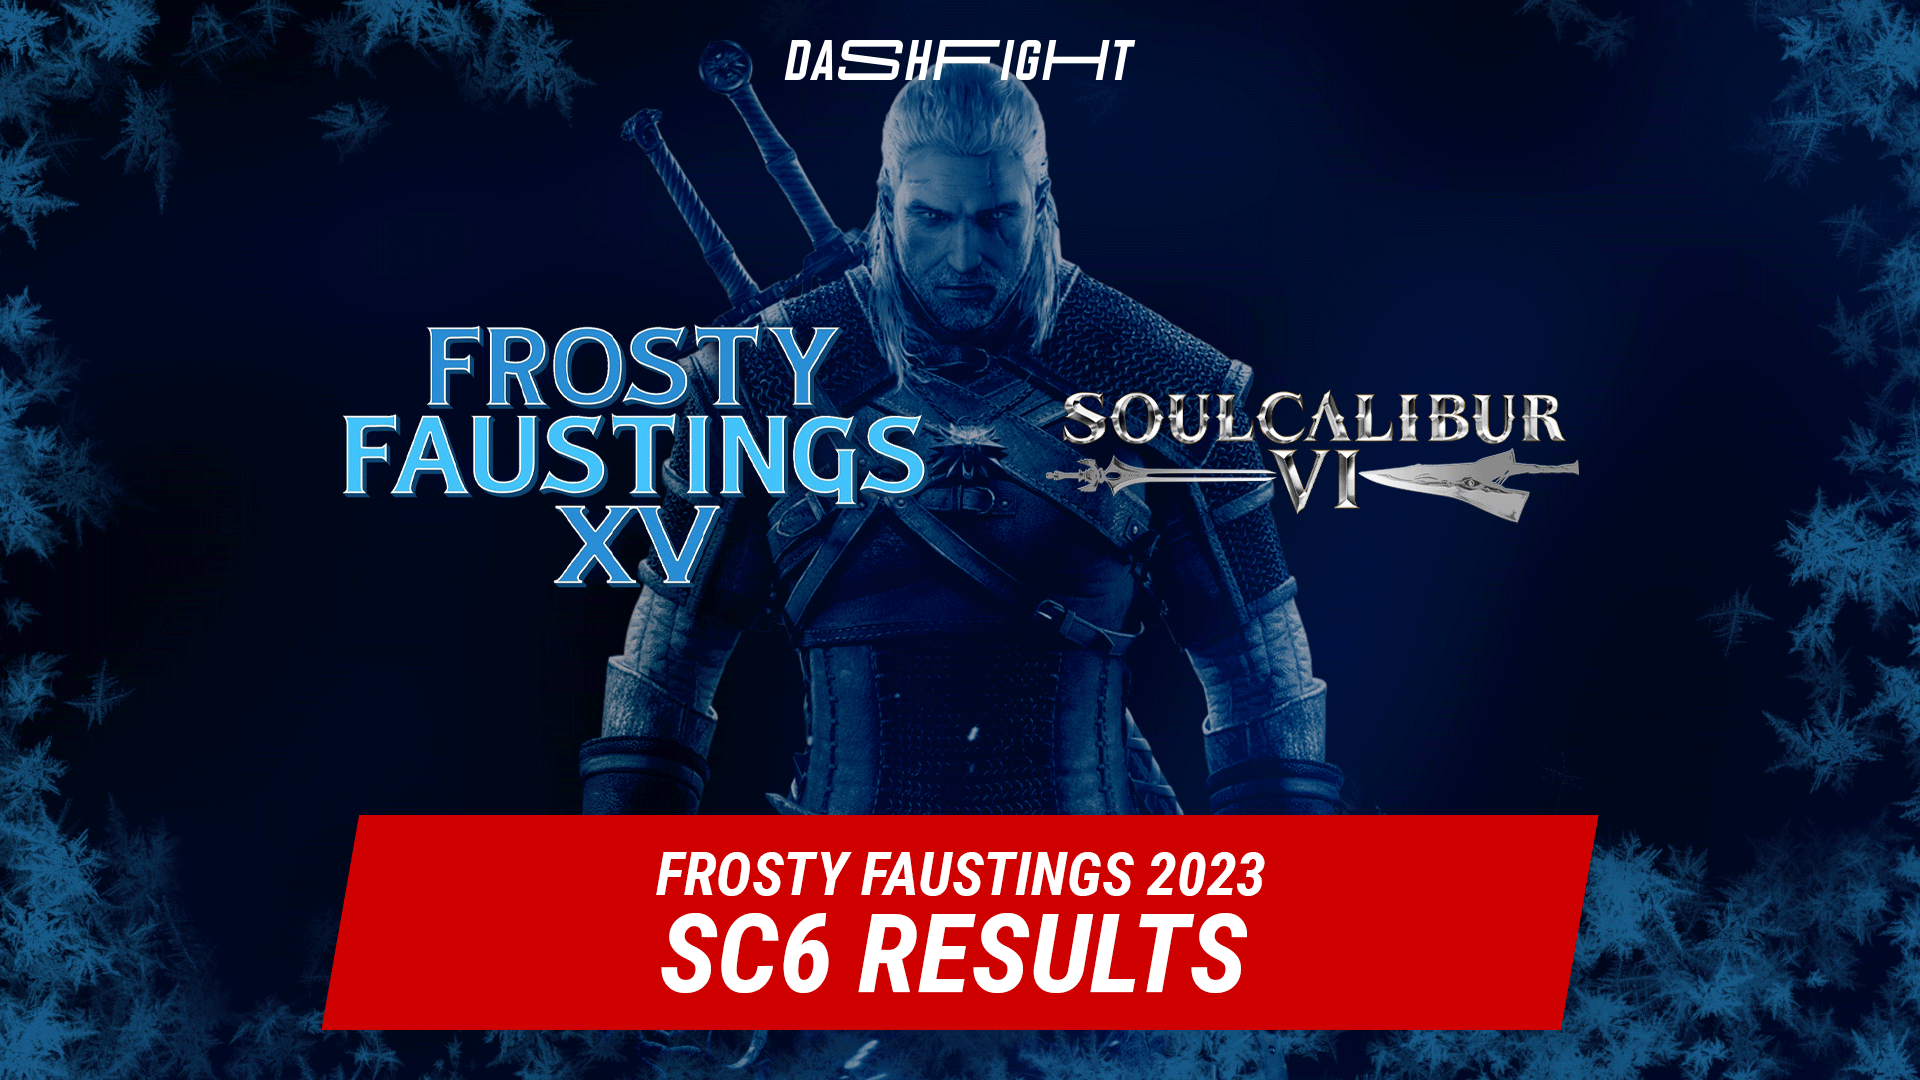 SC6 at Frosty Faustings XV: Magic Does It Again